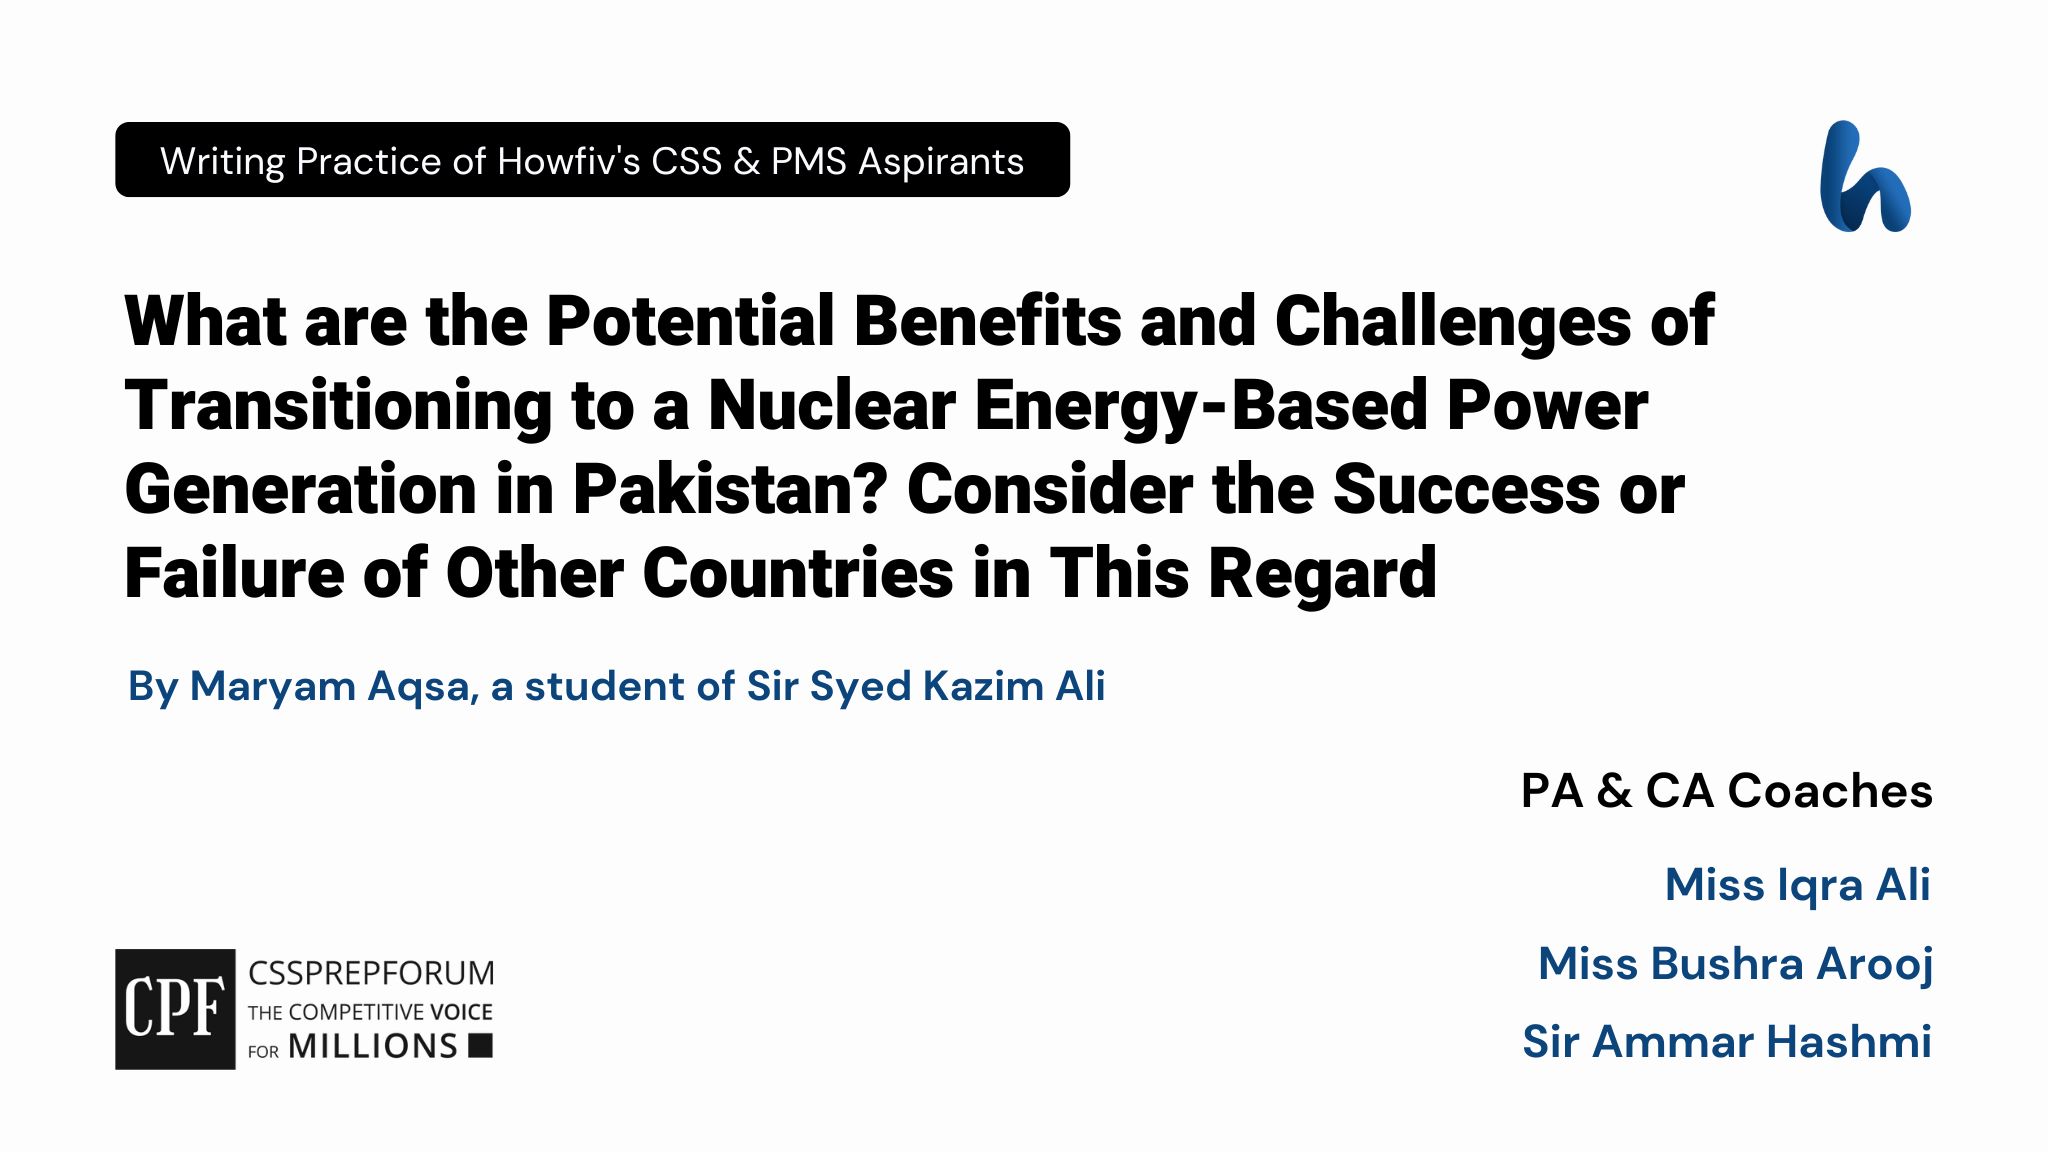 CSS Current Affairs article | Benefits and Challenges of Transitioning to a Nuclear Energy-Based Power Generation | is an article written by Maryam Aqsa under the supervision of Sir Ammar Hashmi...